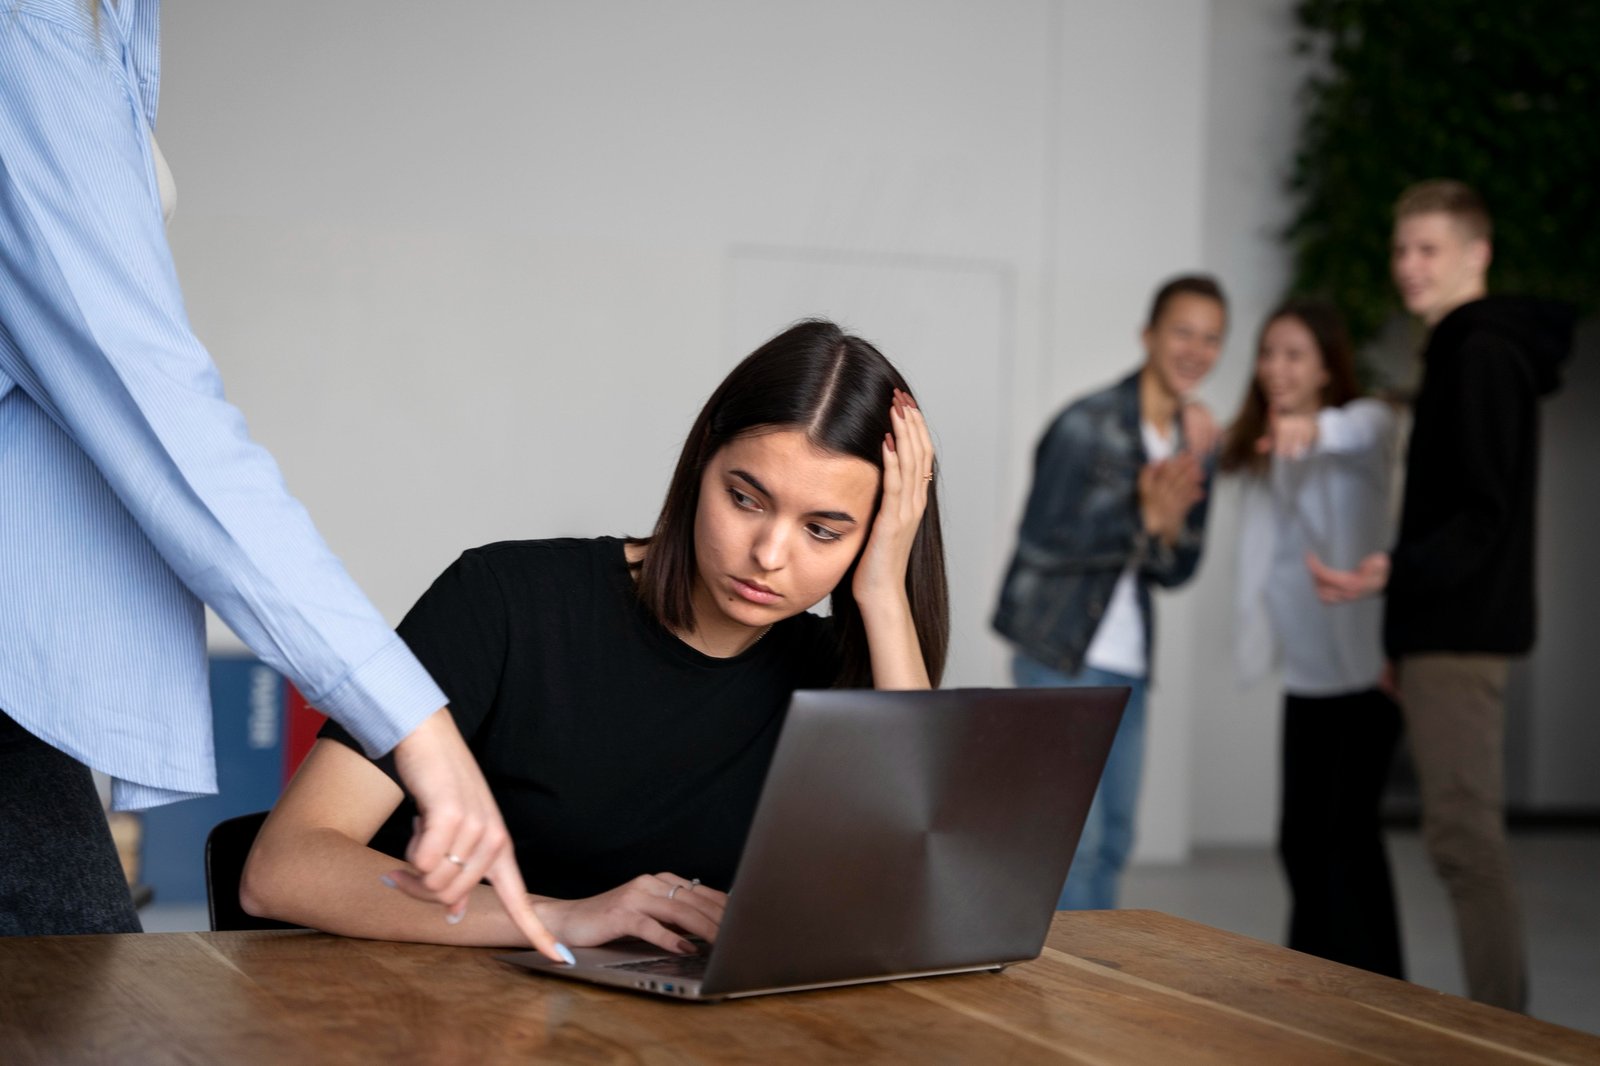 What To Do If A Coworker Treats You Badly?